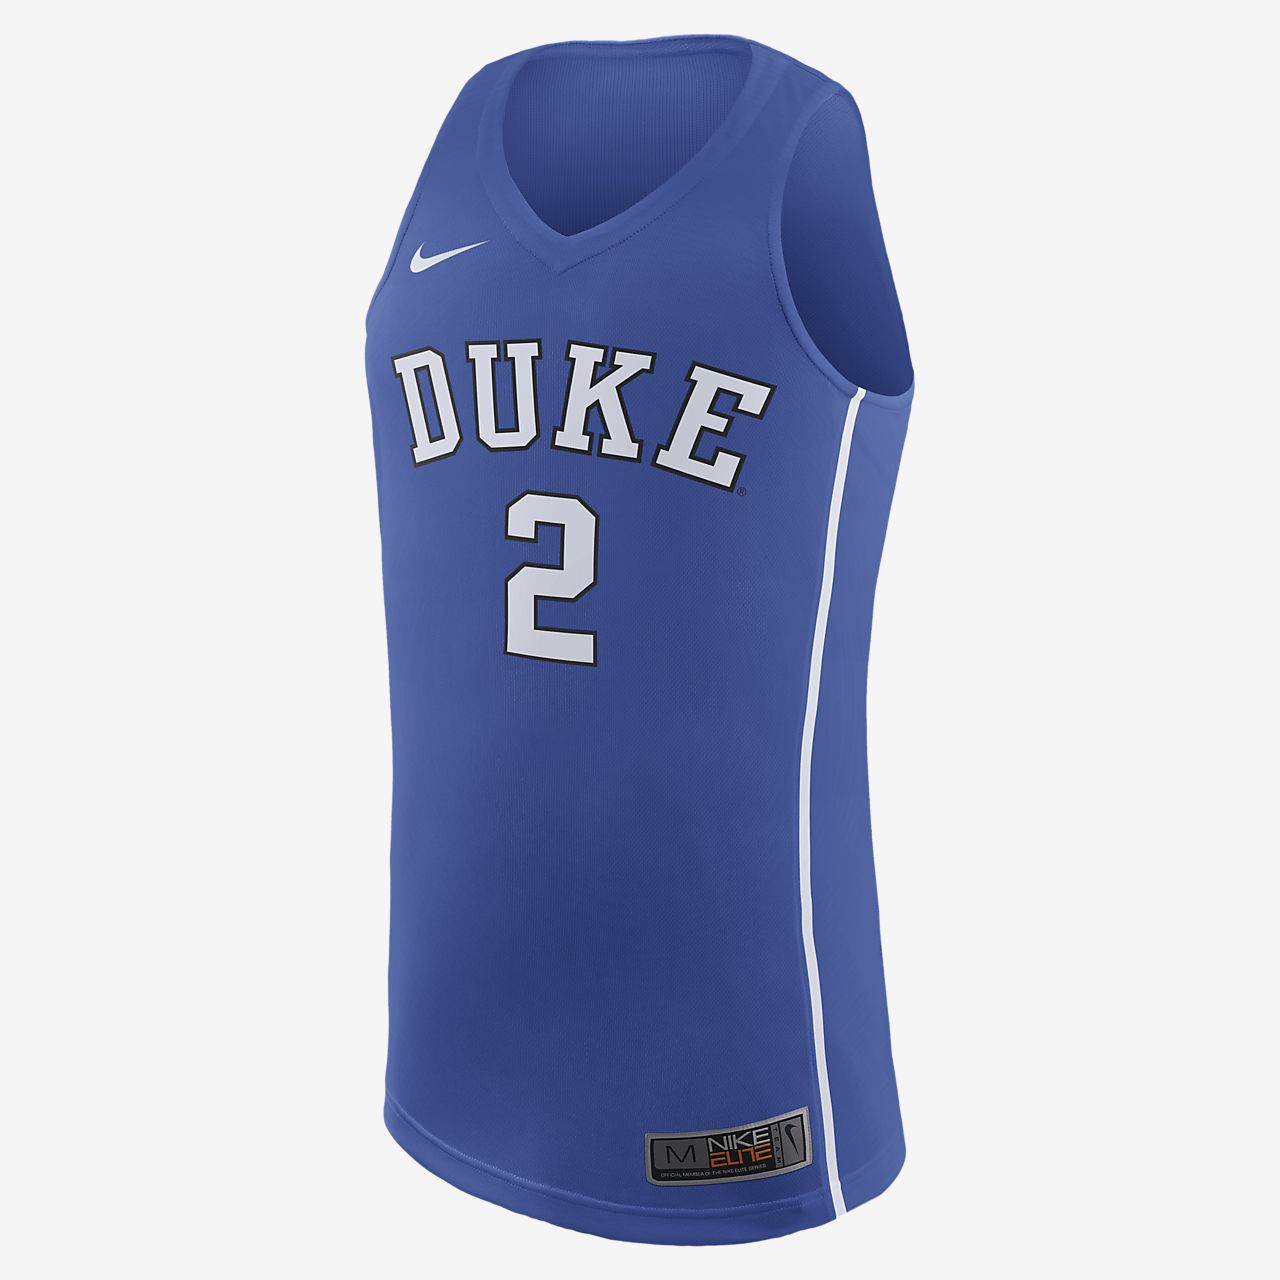 Nike College Jersey Size Chart